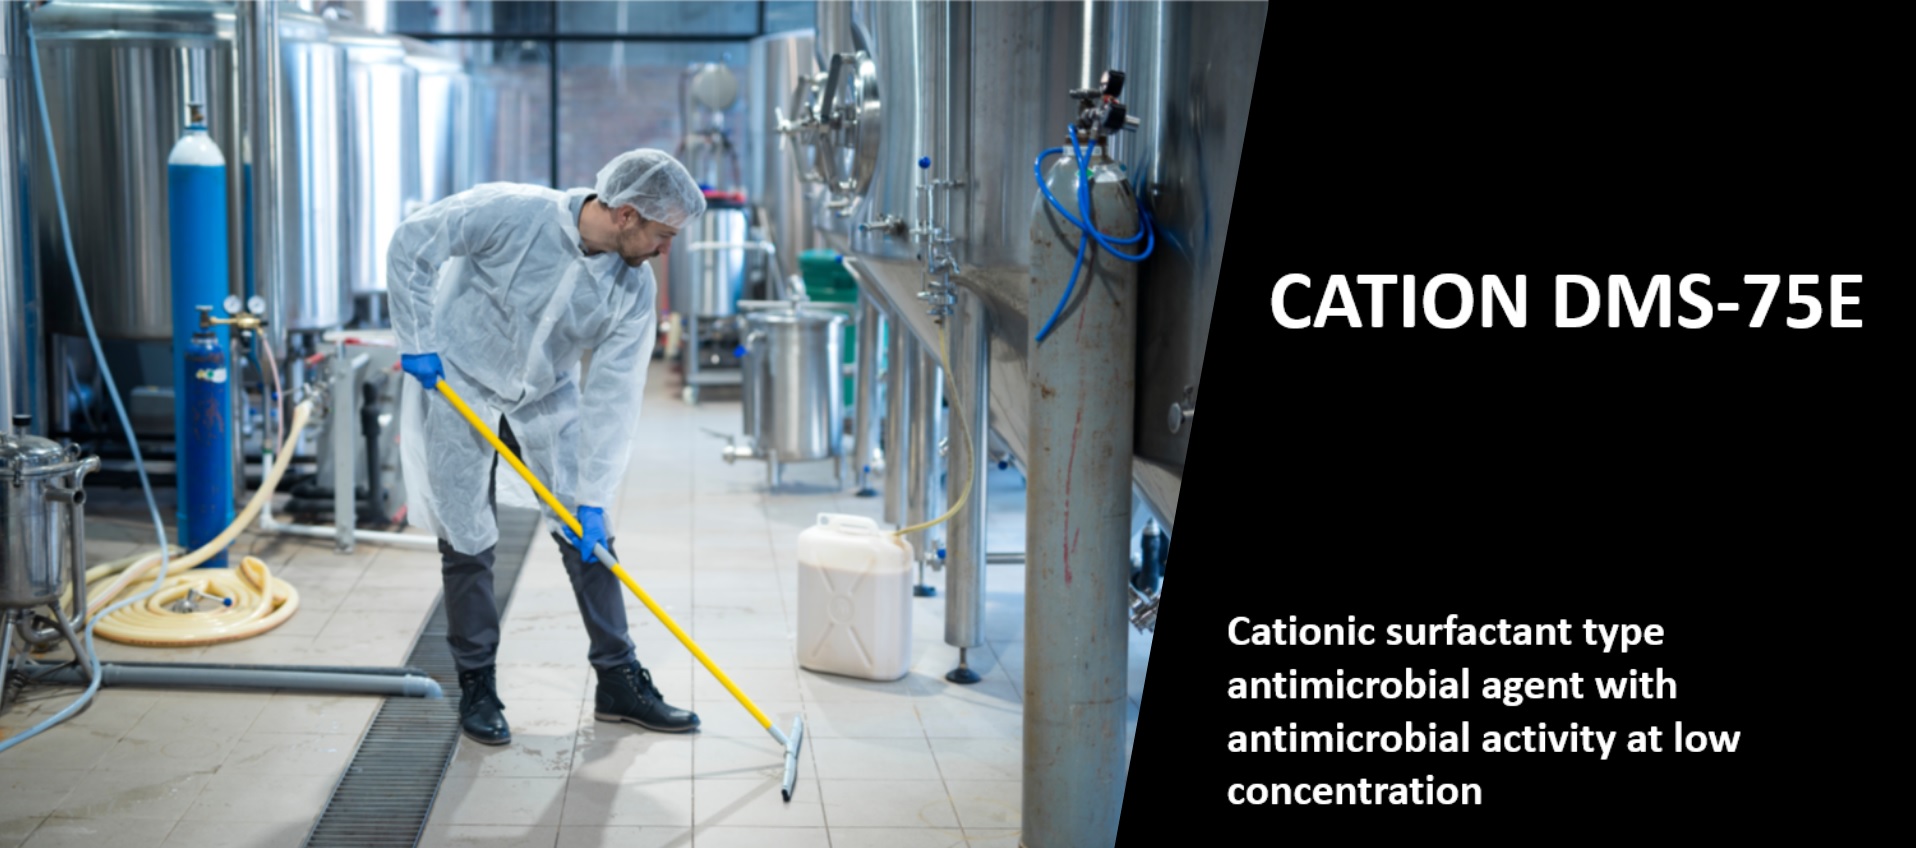 Cationic surfactant type antimicrobial agent "CATION DMS-75E" page is now open.